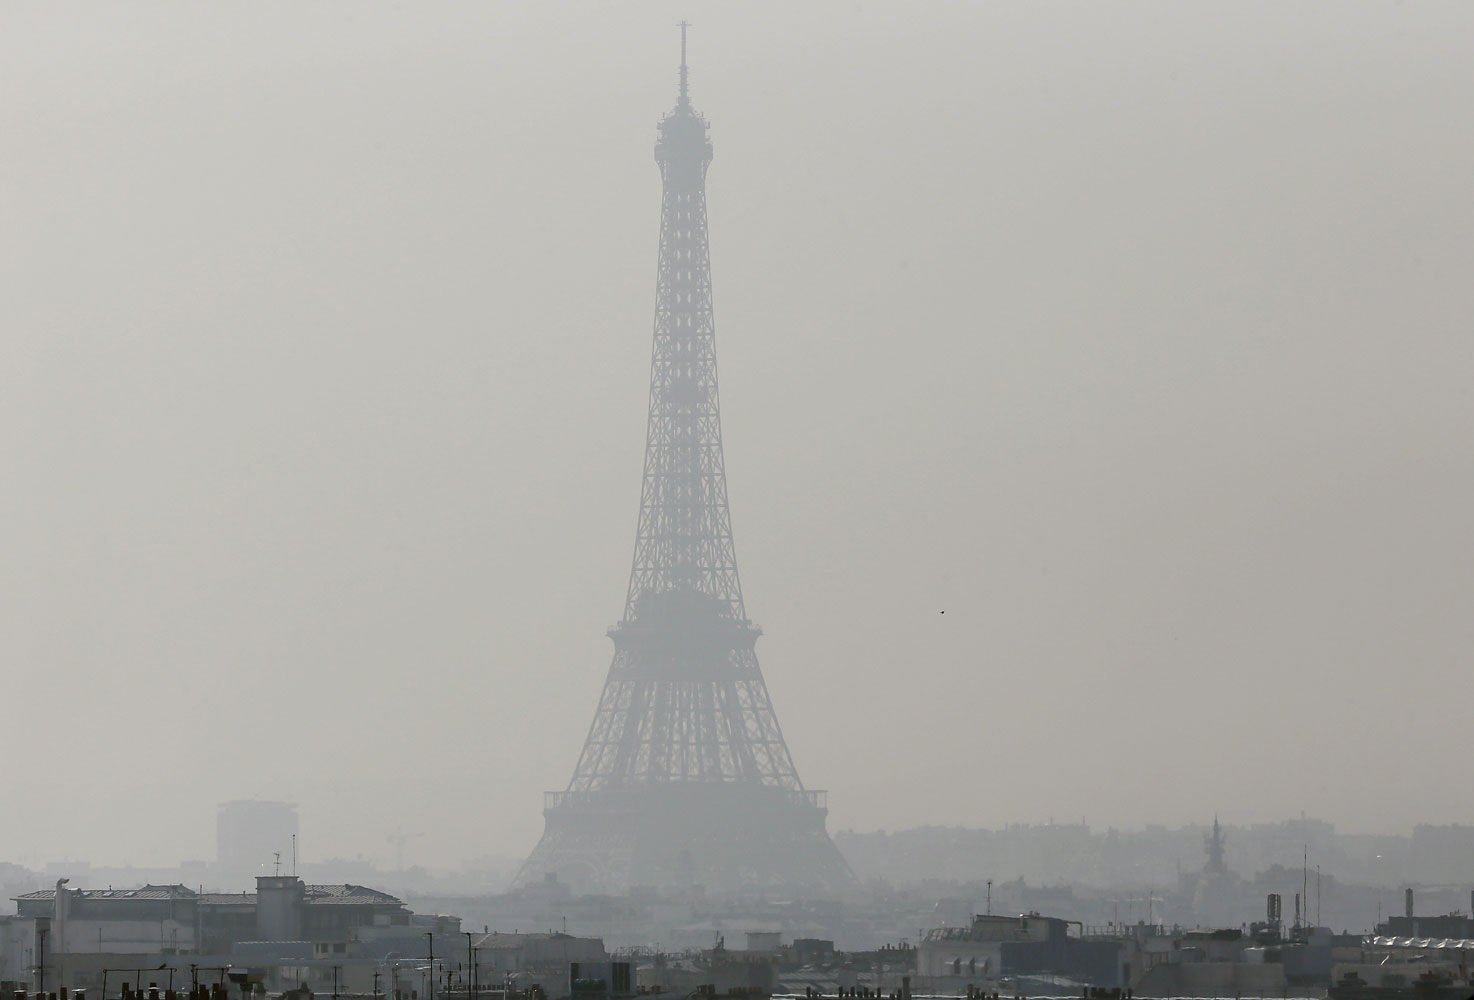 A view of the Eiffel Tower seen through thick smog, on March 14, 2014, in Paris. (Patrick Kovarik—AFP/Getty Images)